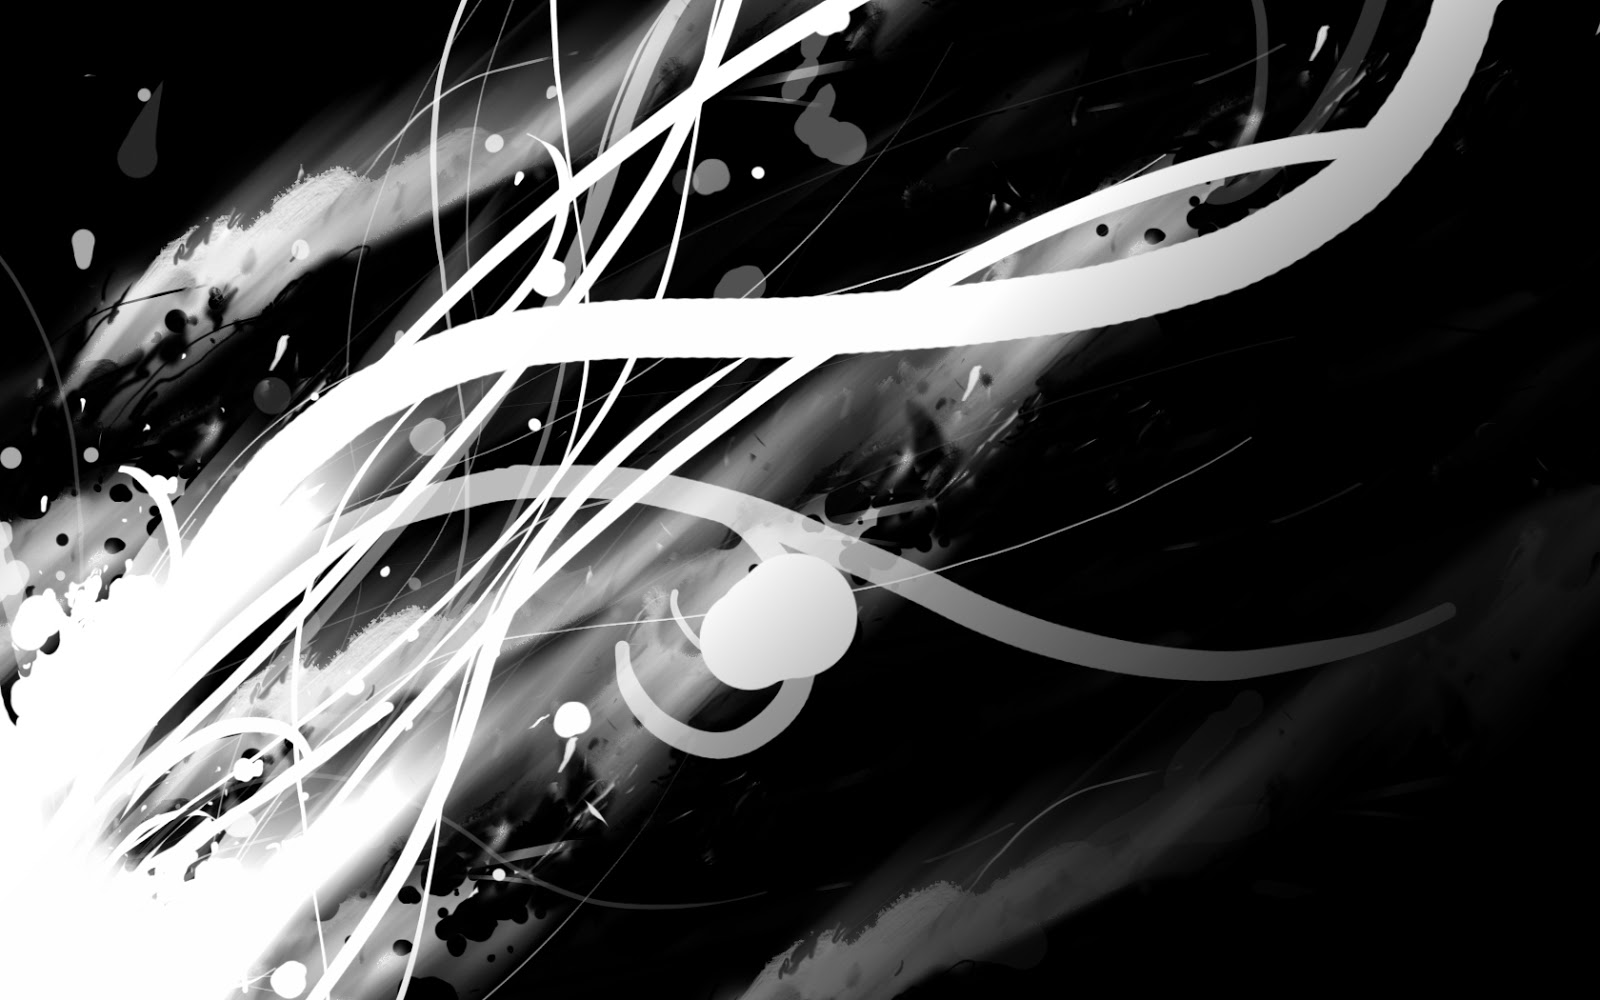  white and black abstract wallpapers free black abstract wallpapers